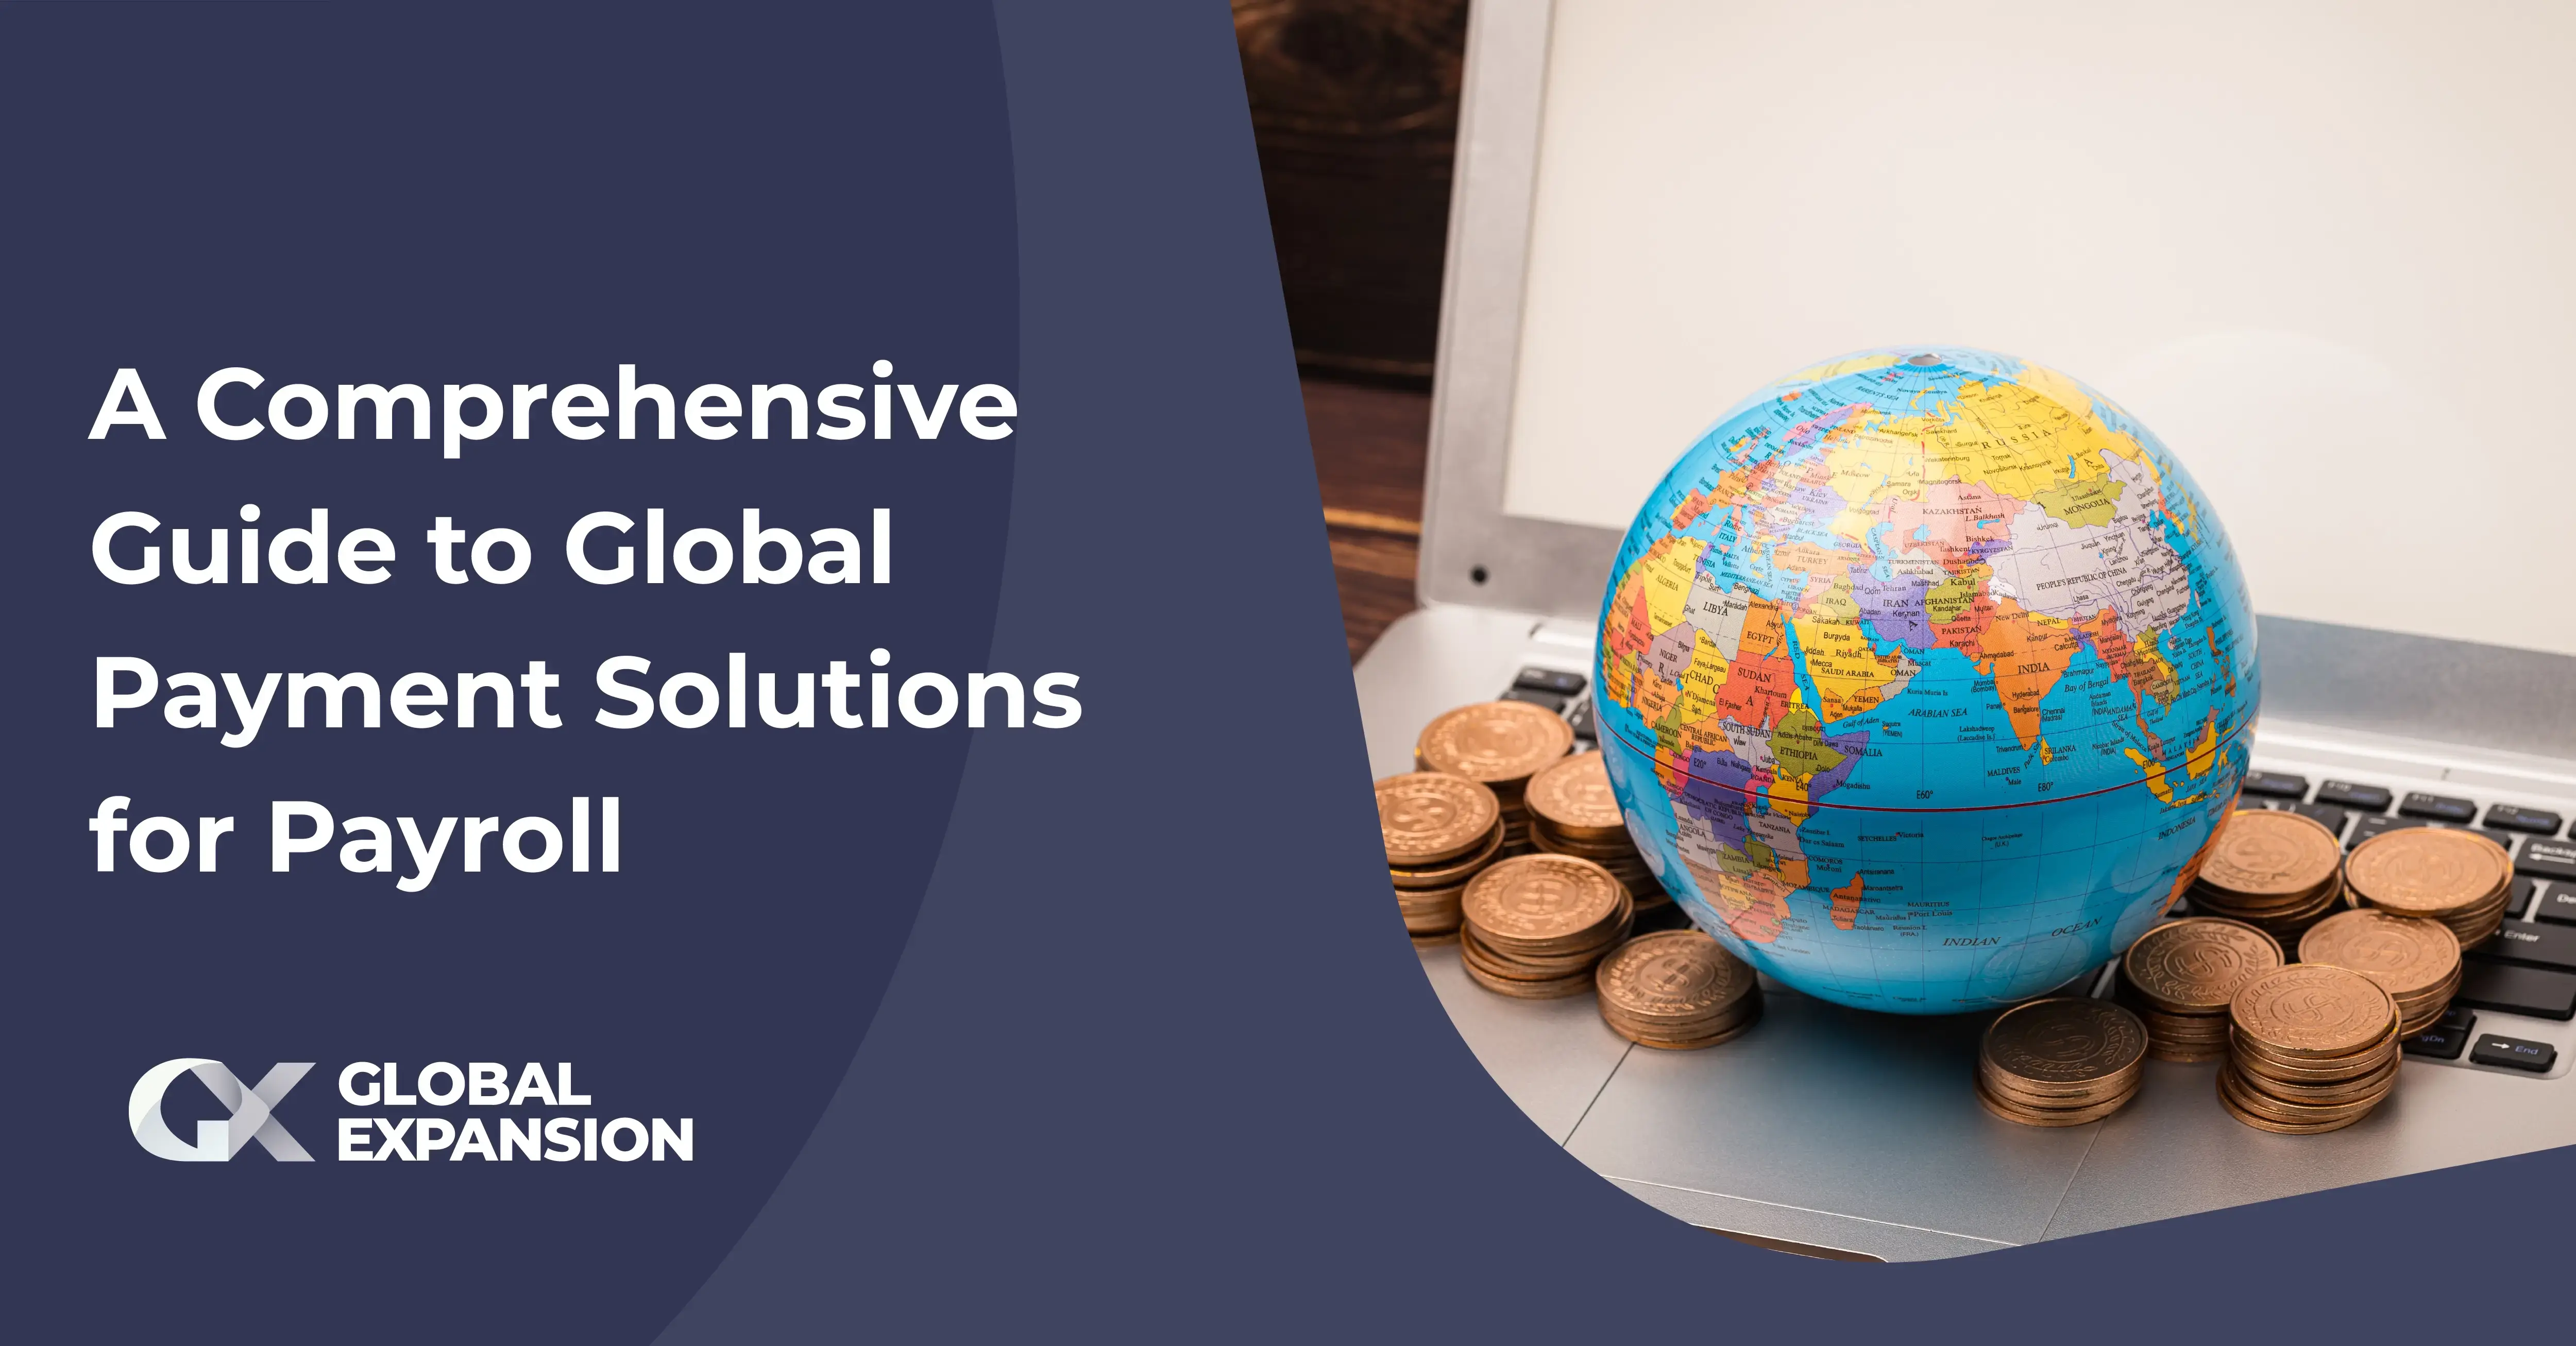 A Comprehensive Guide to Global Payment Solutions for Payroll